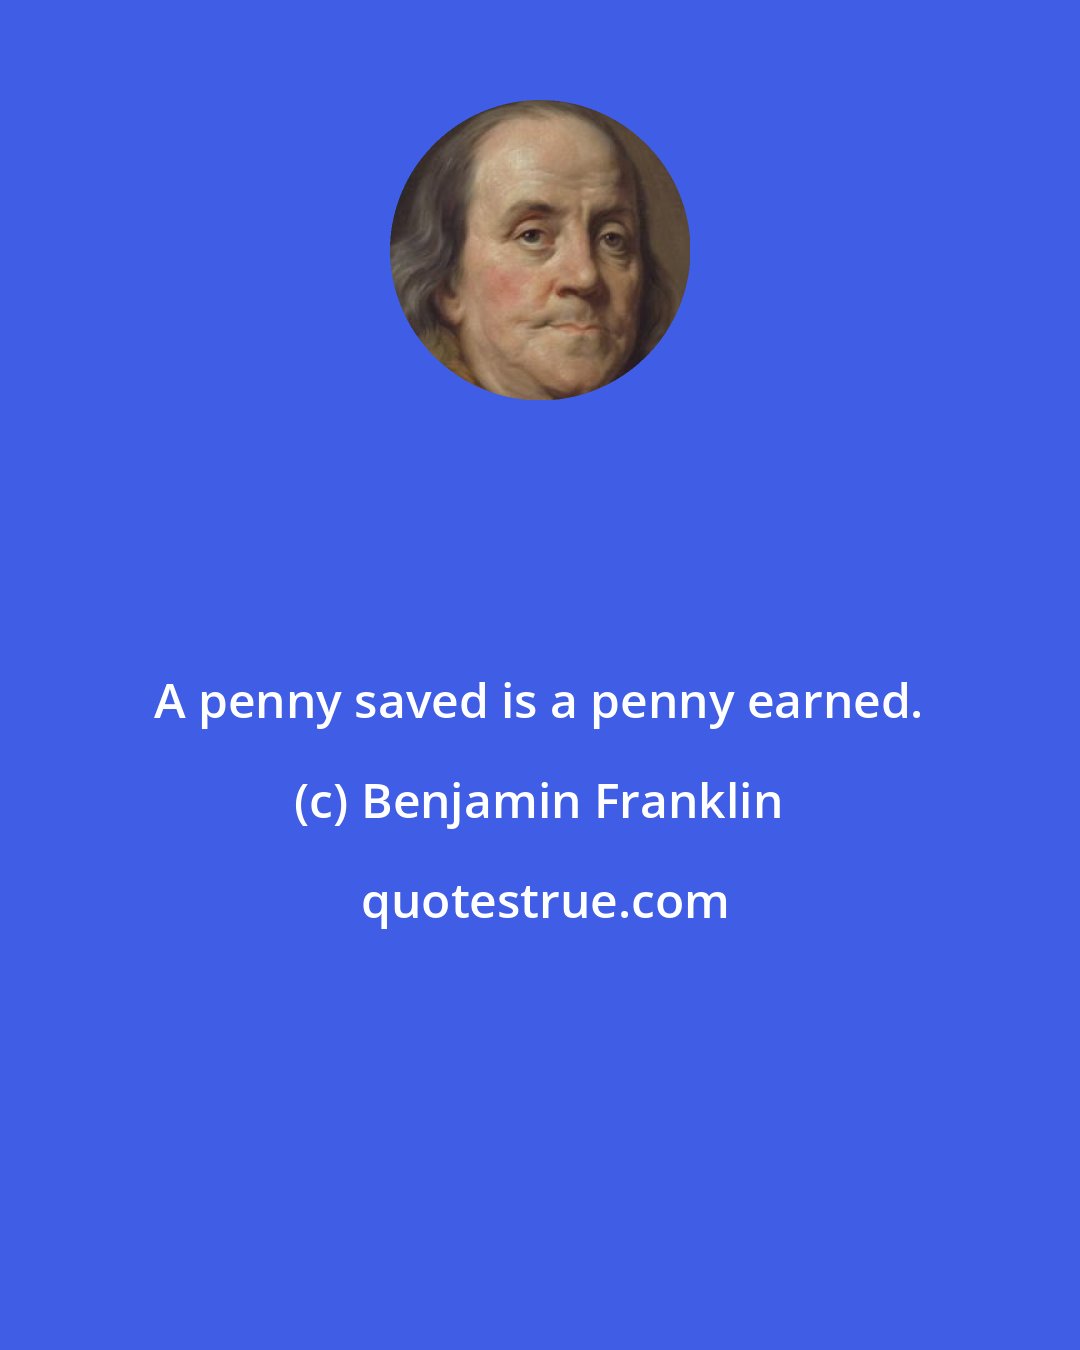 Benjamin Franklin: A penny saved is a penny earned.